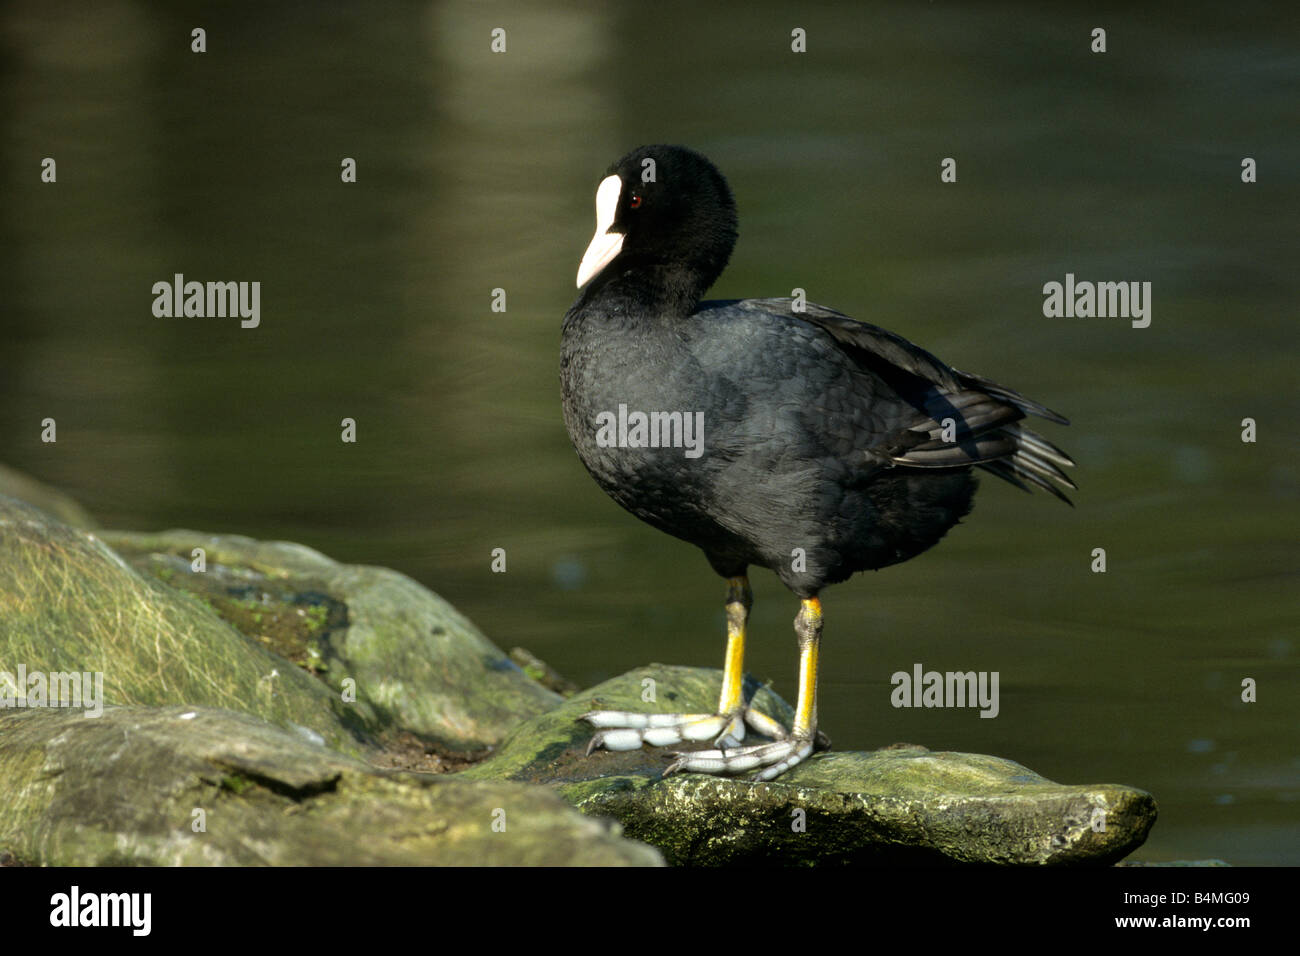 Coot (Fulica atra) standing on stones showing its large feet Stock Photo